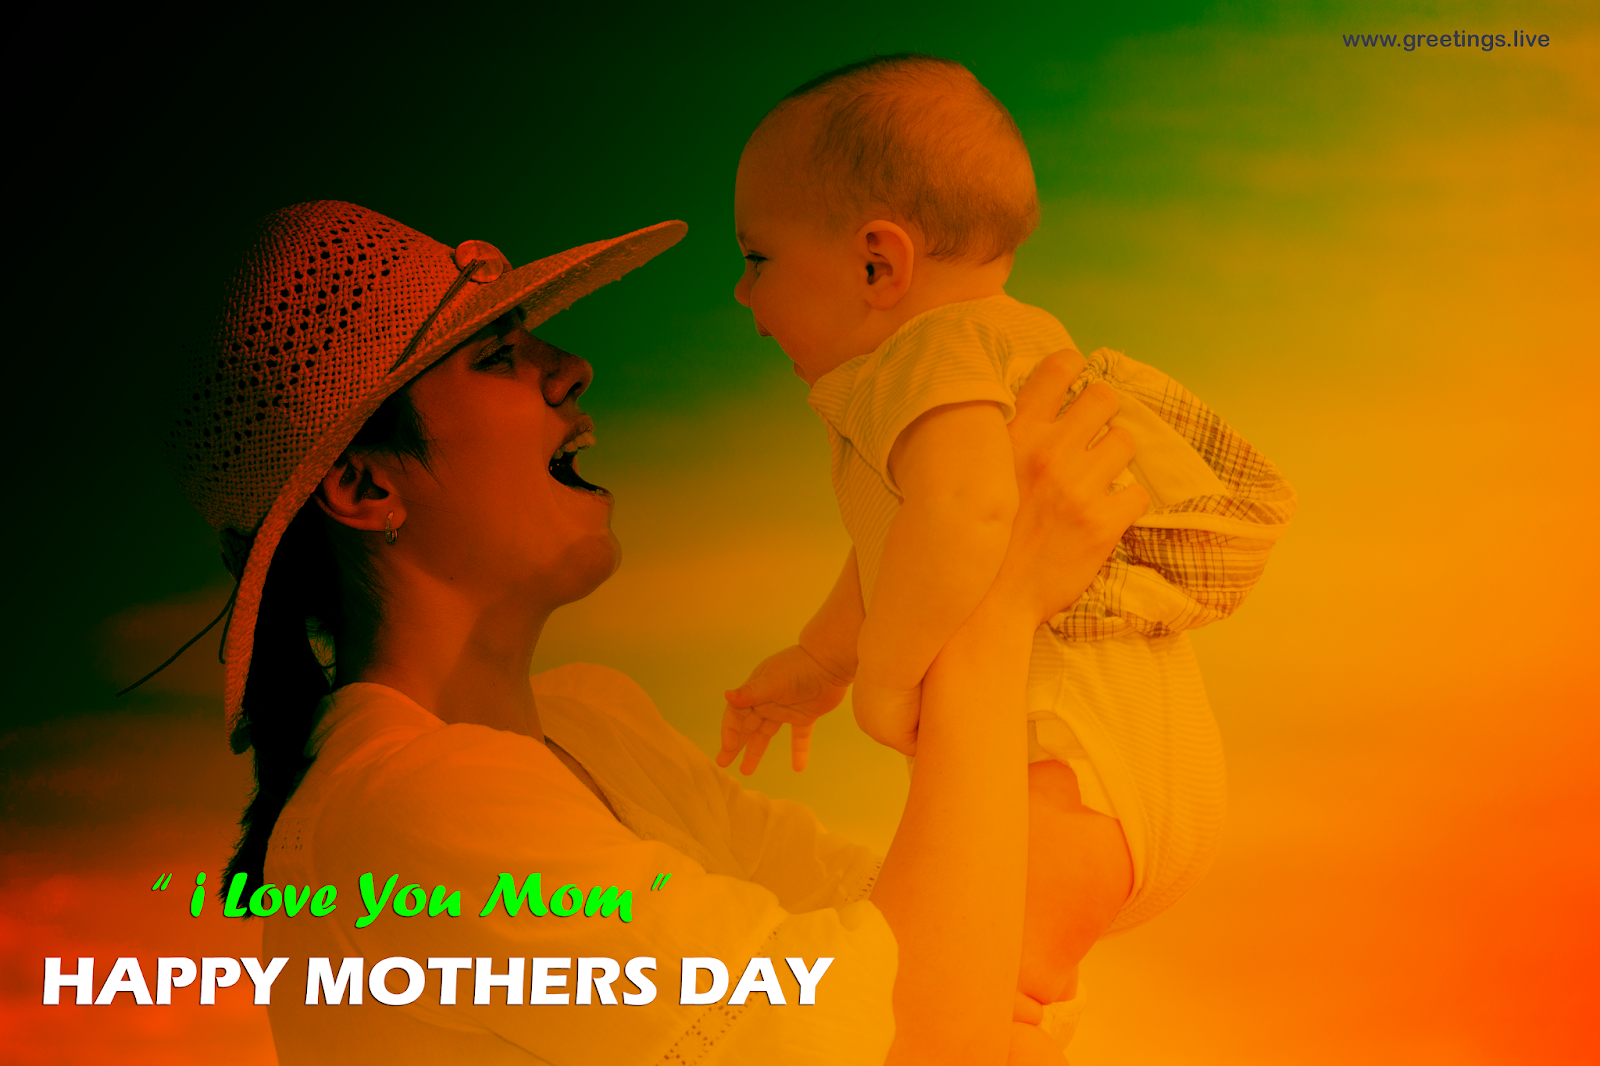 Greetings Live Free Daily Greetings Pictures Festival Gif Images International Mother S Day 2019 Wishes Images